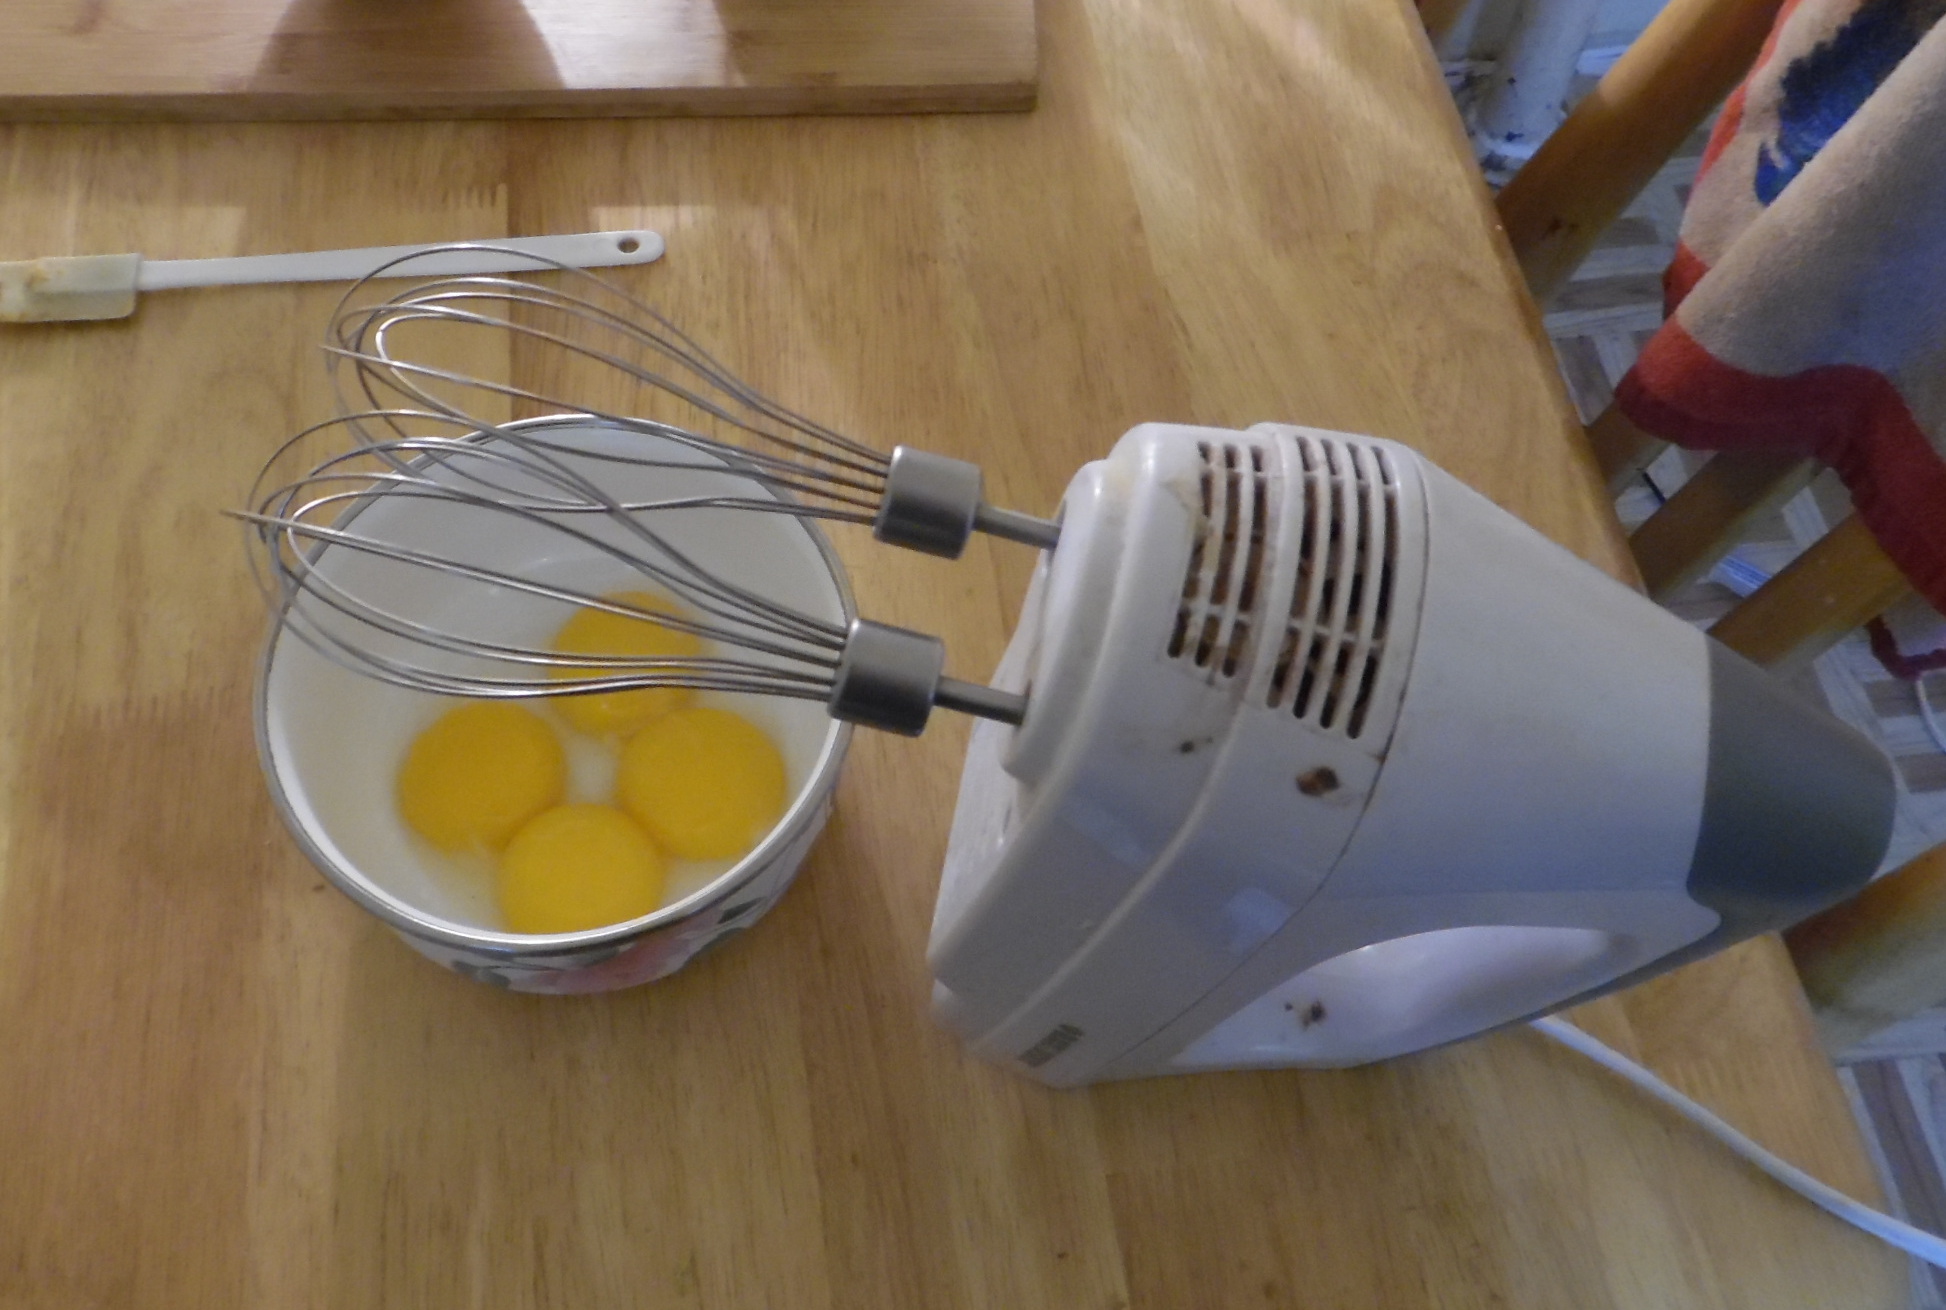 Hand mixer, for beating the yolks.